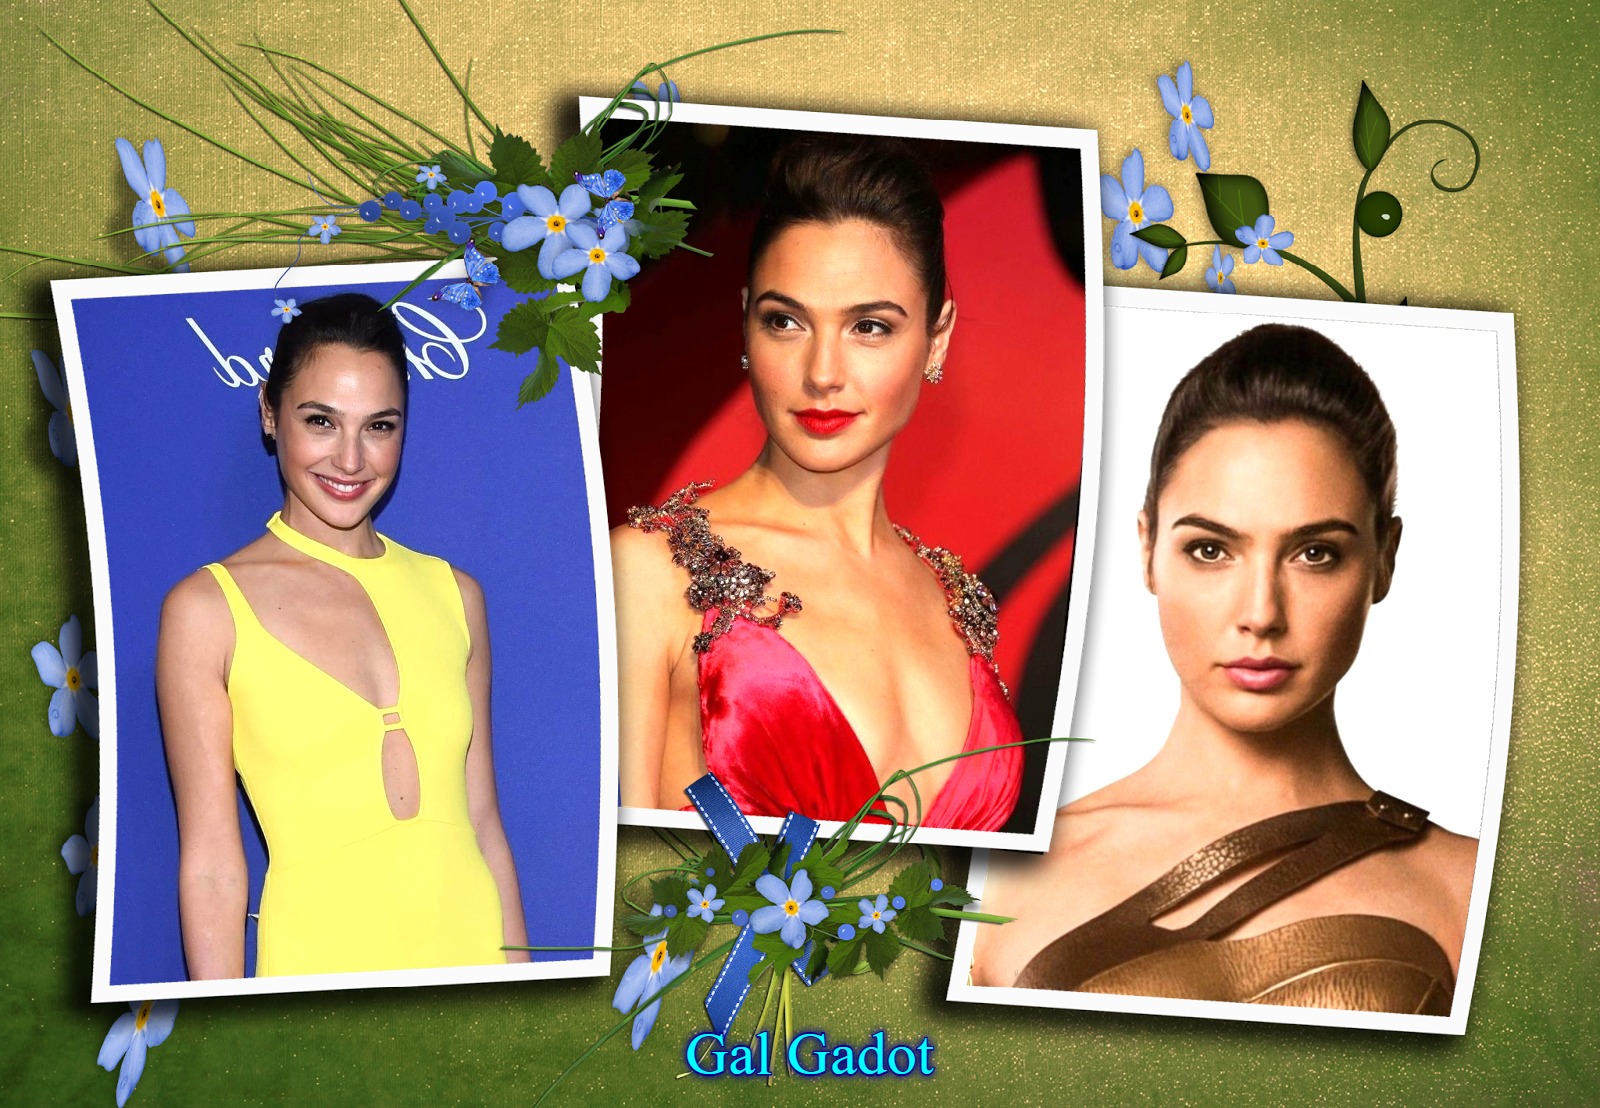 You are currently viewing “Gal Gadot-From Miss Israel To -Fast & Furious”